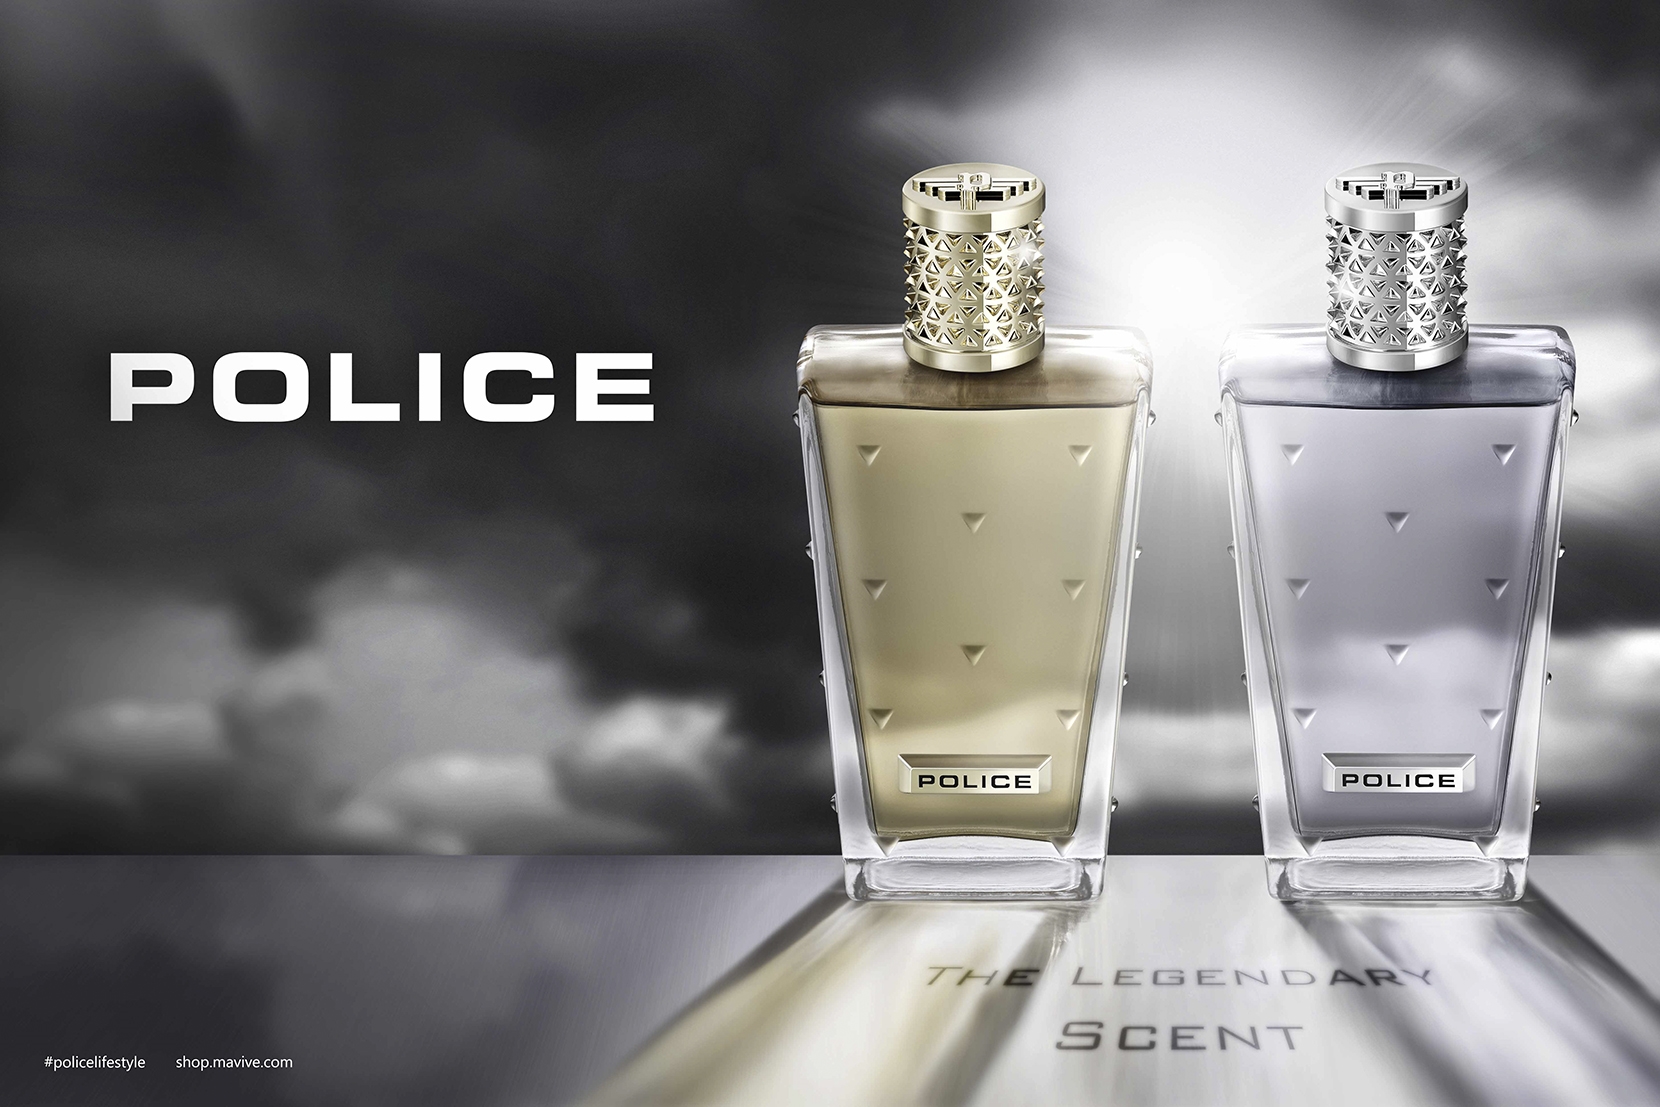 The Legendary Scent for Man